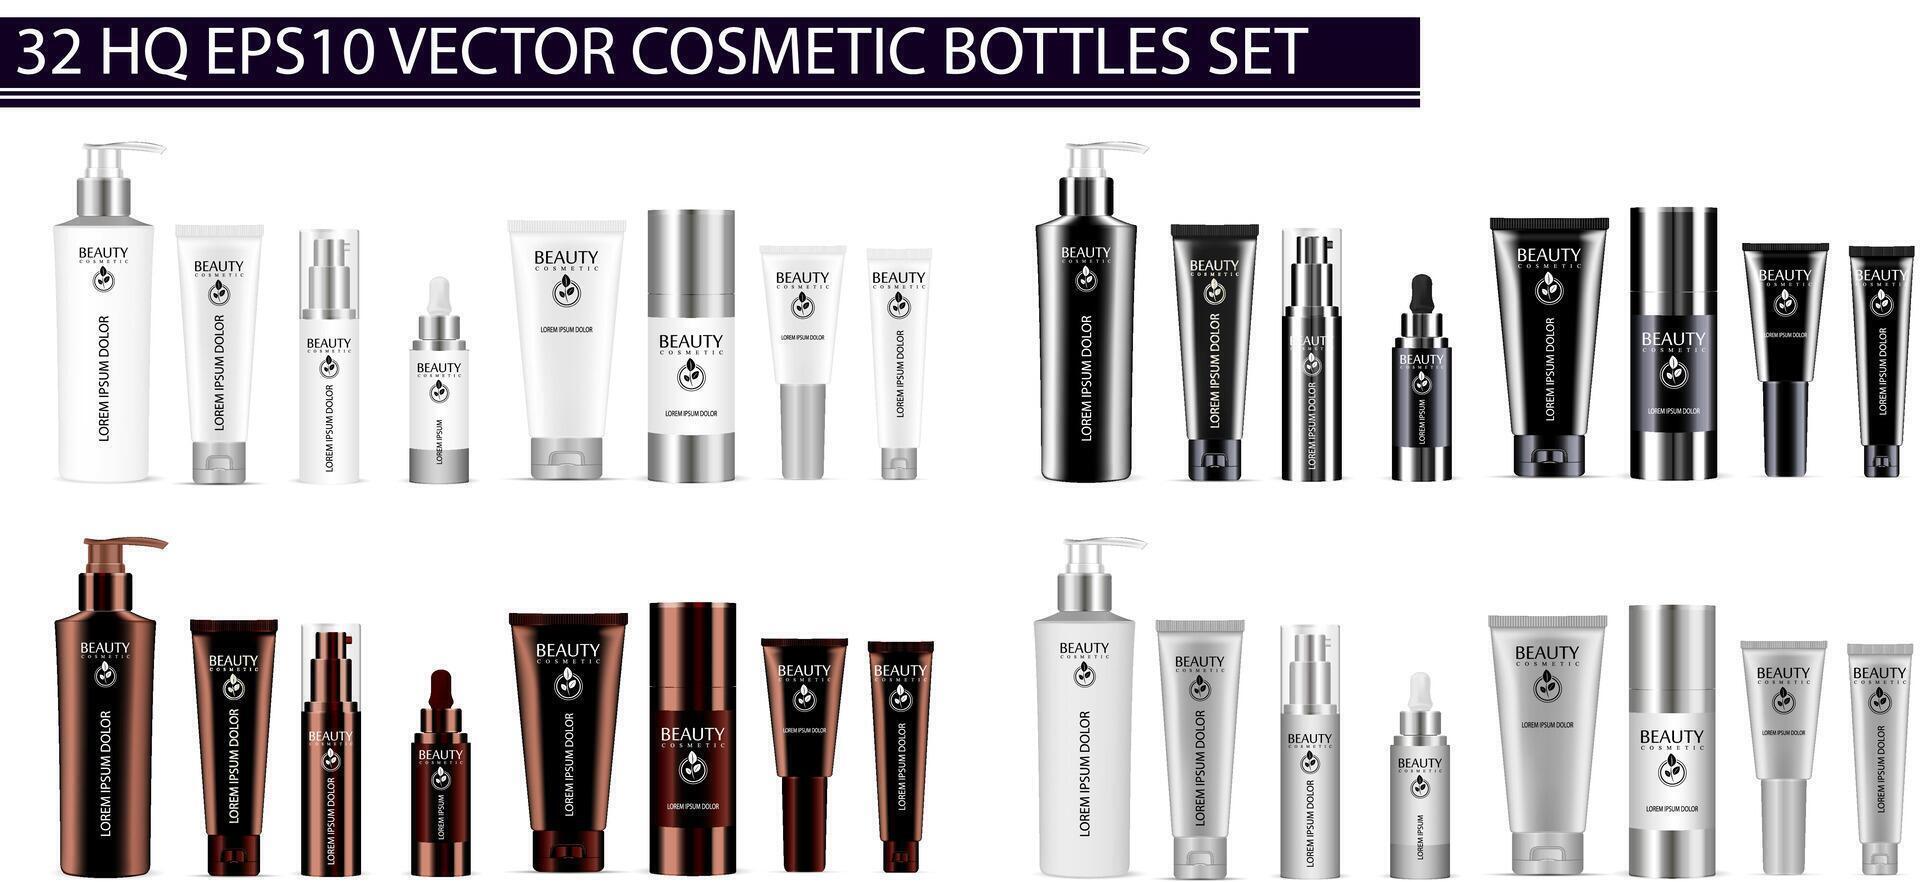 Luxury color 32 pcs. cosmetics bottle set dispenser, dropper, cream tubes, deodorant. Vector cosmetic mockup package design. Sample label and logo included.